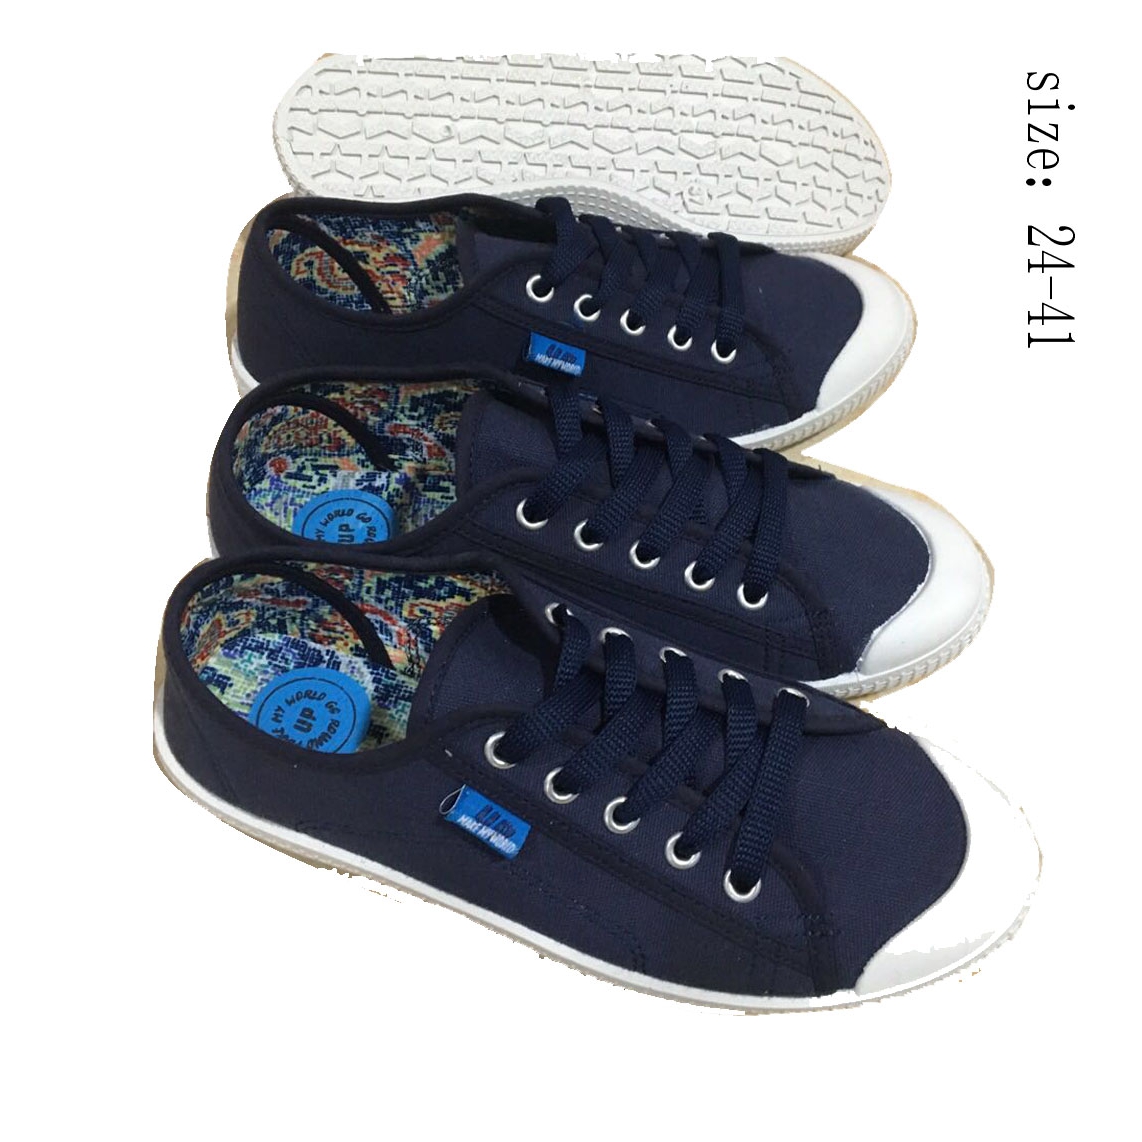 New design women casual shoes canvas shoes (HP19517-5) 1. ITEM...